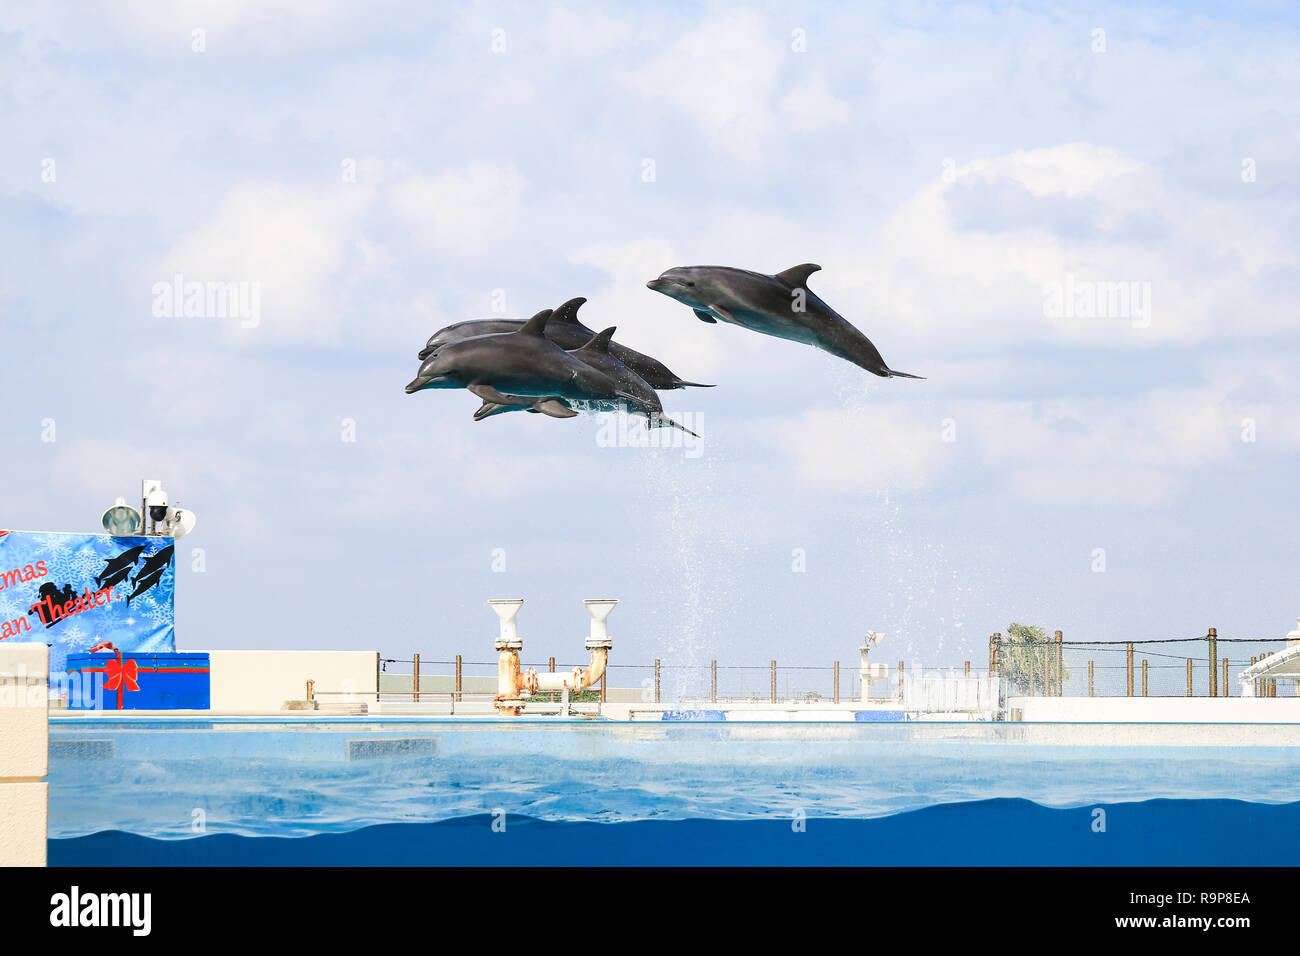 dolphin jumping and performing in a pool, Okinawa, Japan Stock Photo